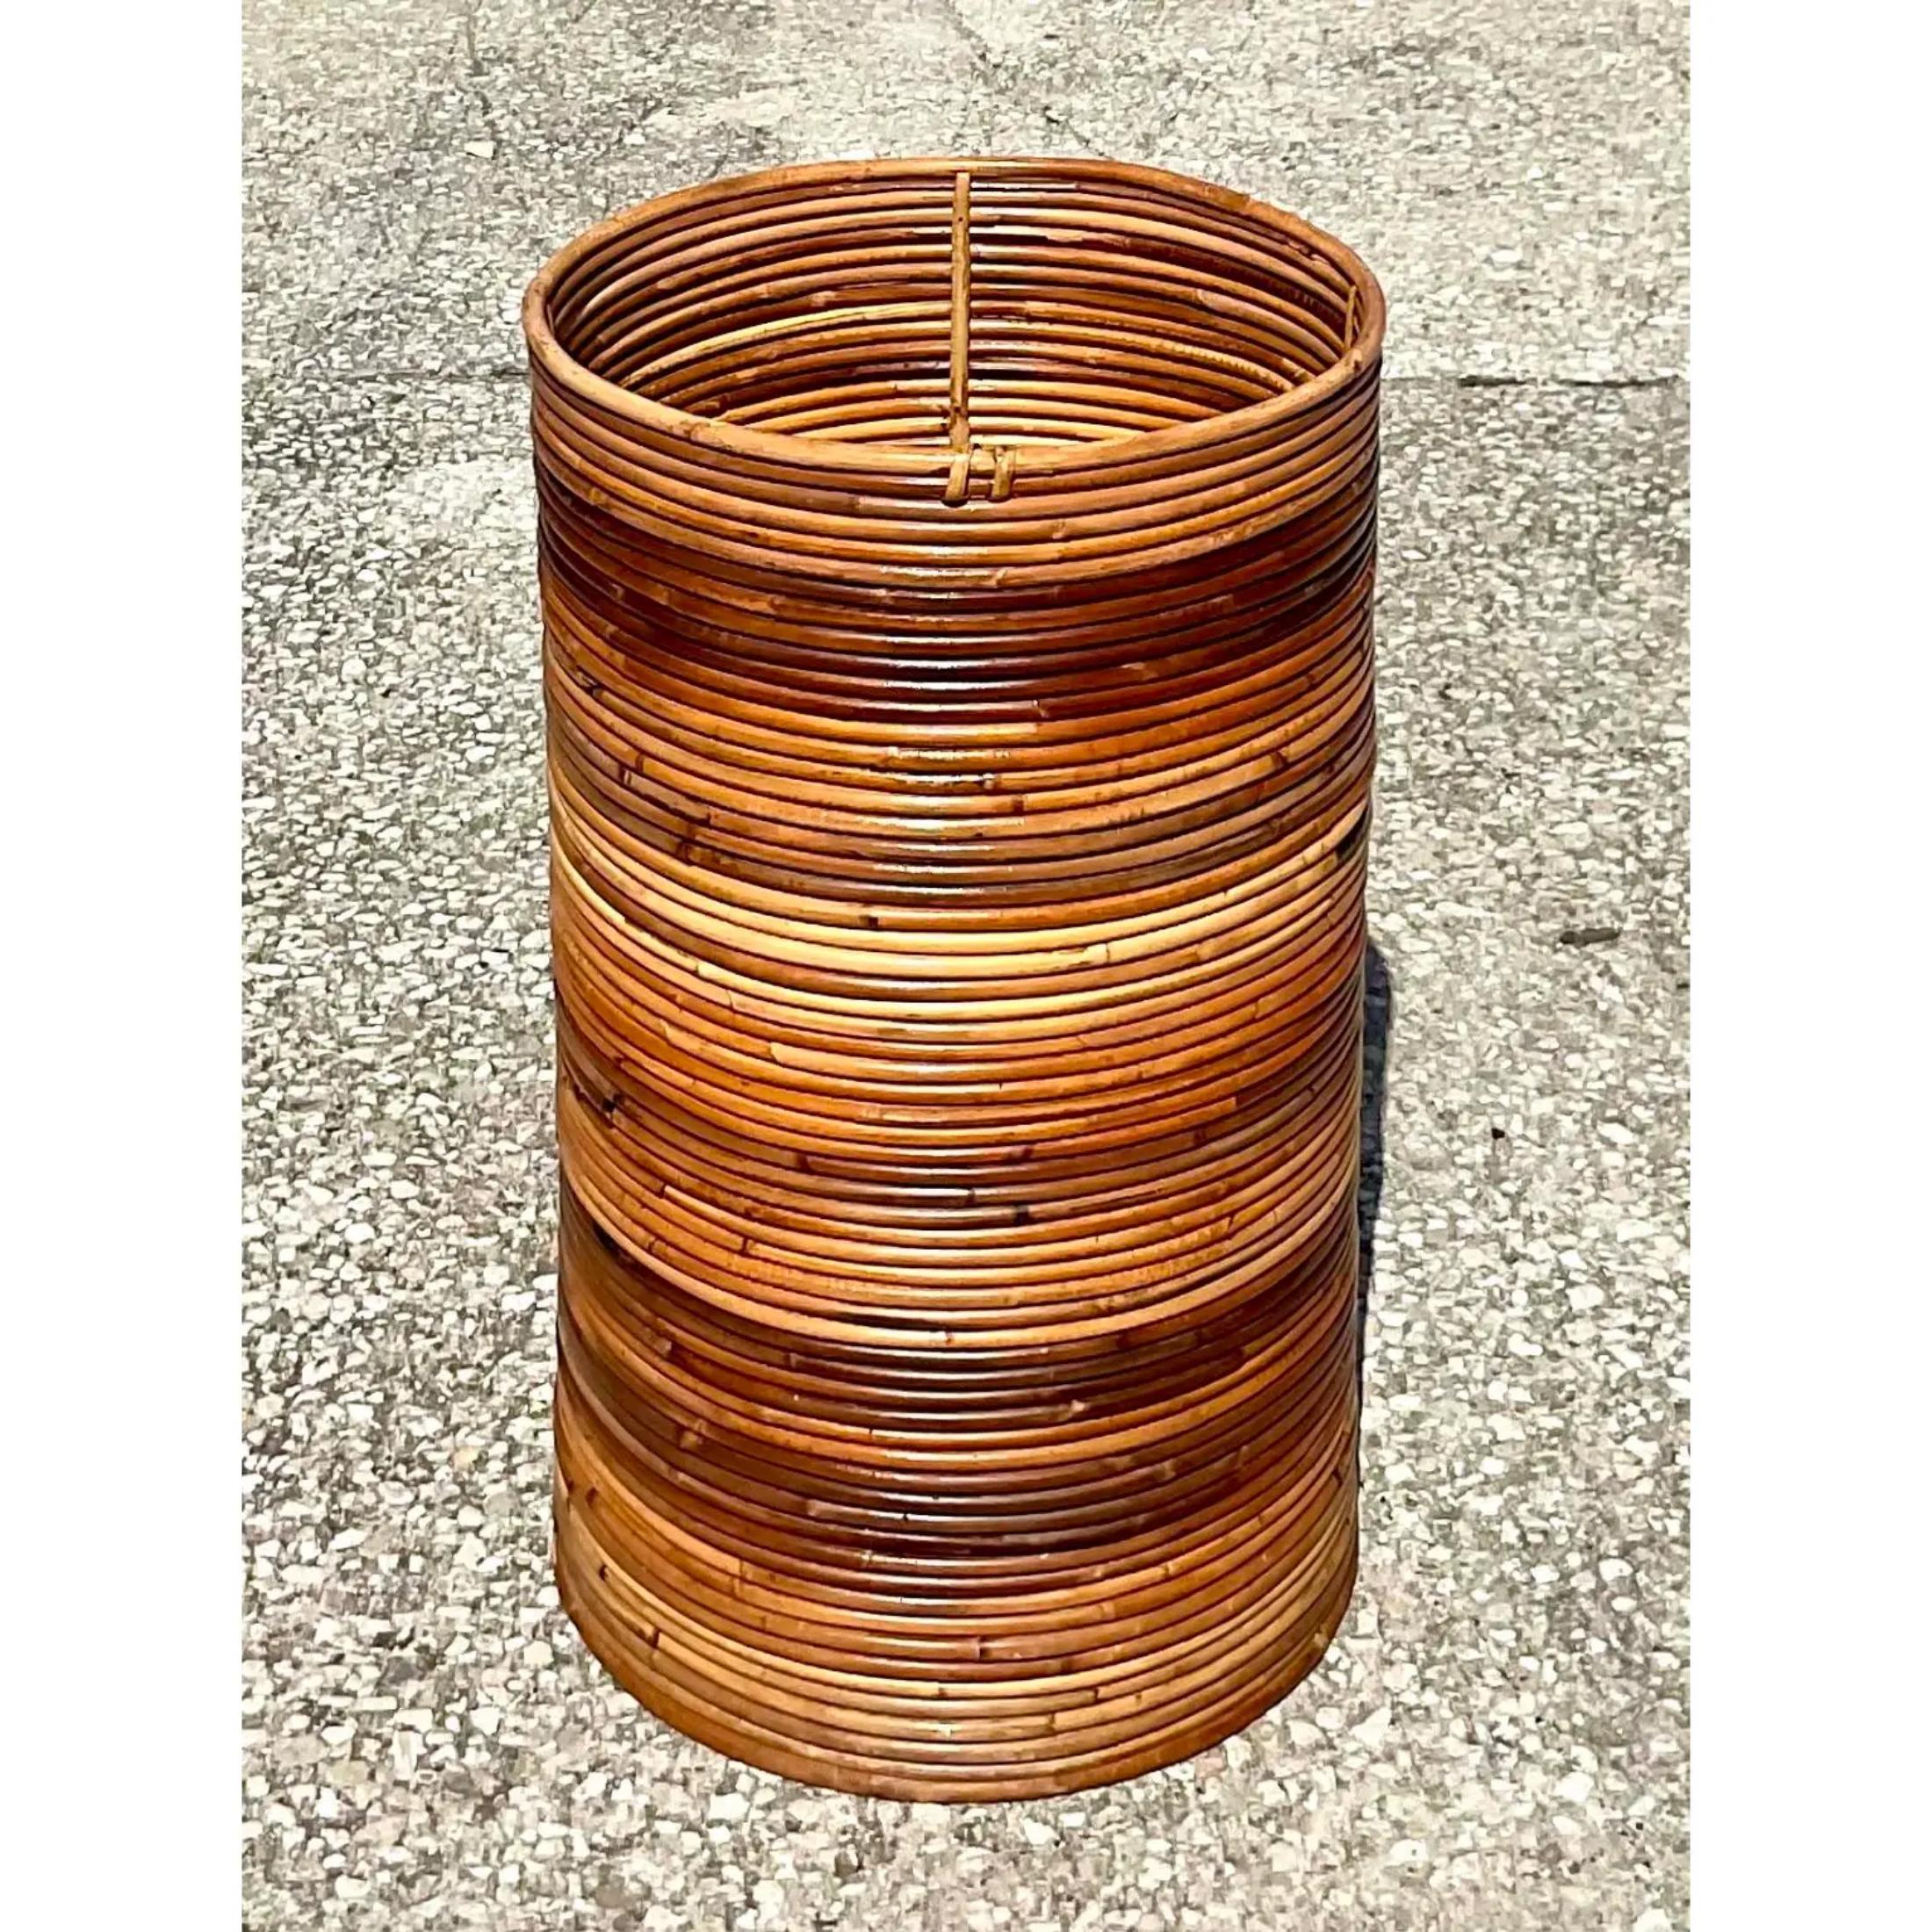 Fantastic vintage Coastal tall basket. Made from beautiful tortoise pencil reed in an ombré color design. Perfect indoors or out side in a covered area. Super chic. Acquired from a Palm Beach estate